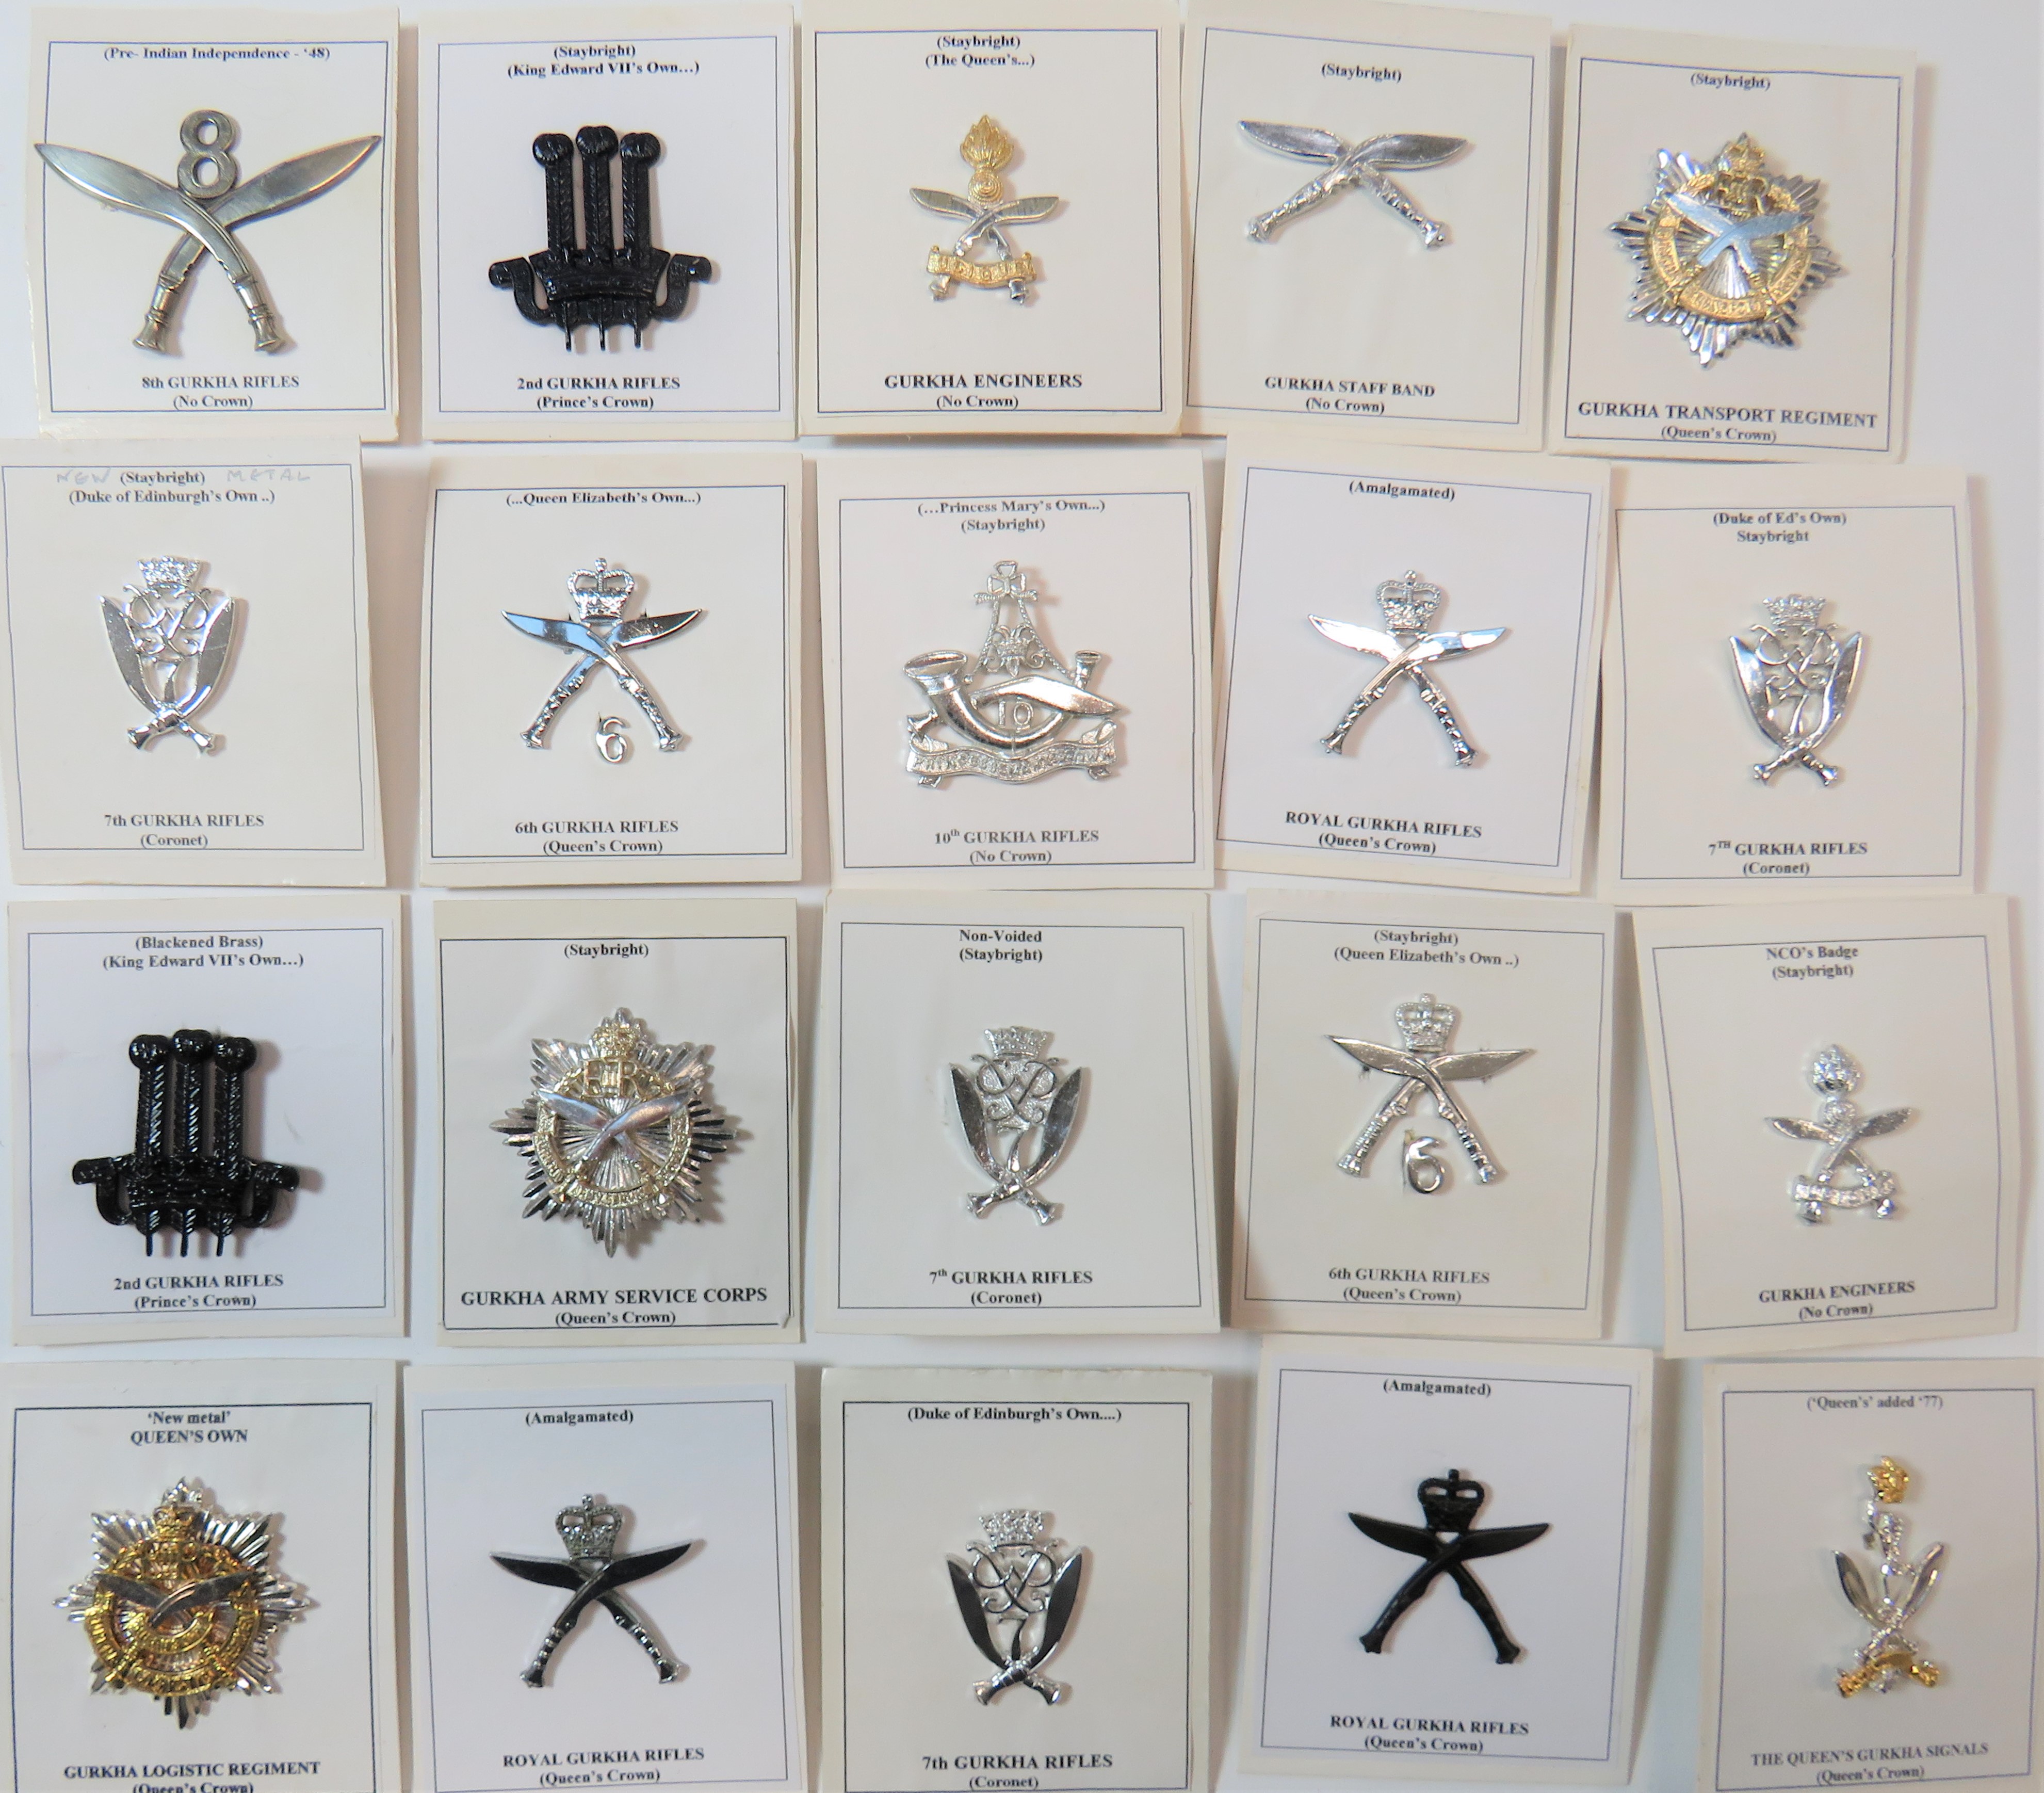 Post 1953 Gurkha Cap Badges including blackened 2nd GR ... Plated QC 6th GR ... Plated 7th GR ...